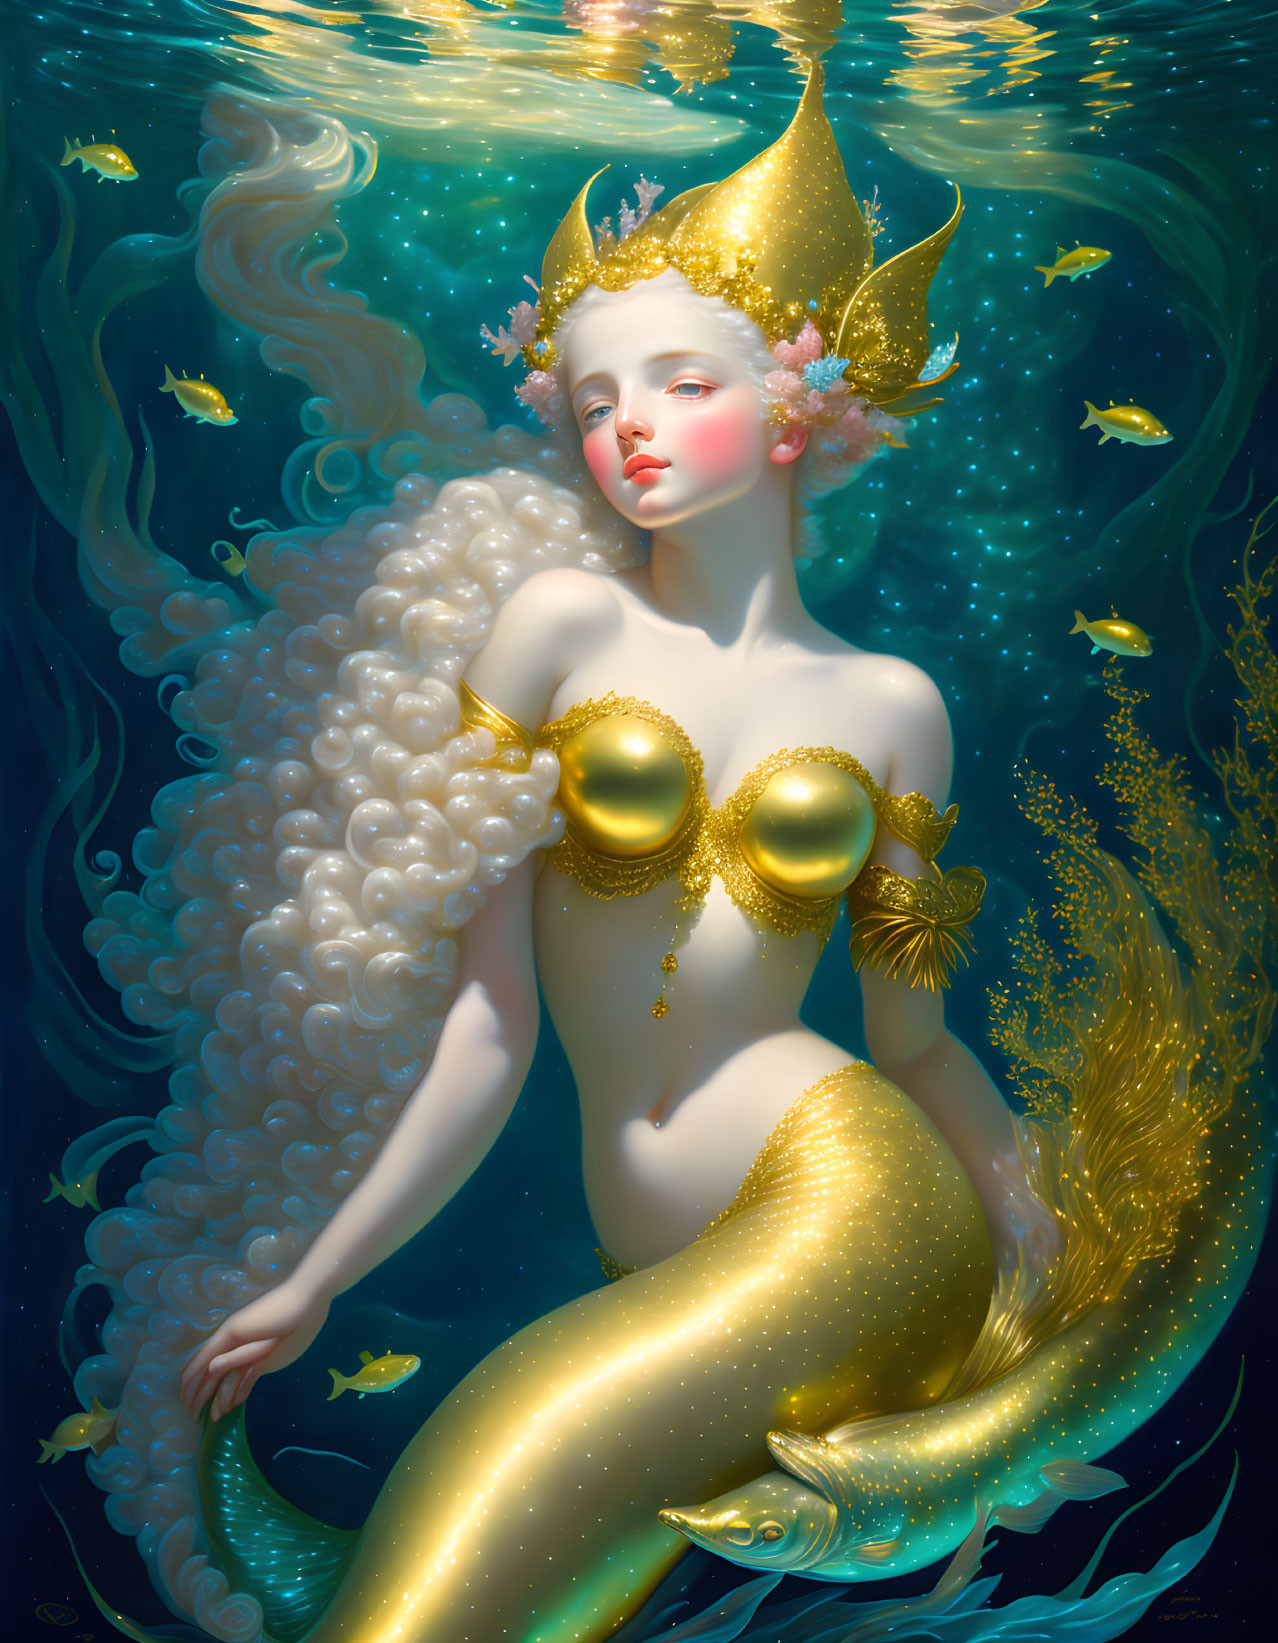 Golden-hued mermaid with regal crown swimming in blue water with goldfish